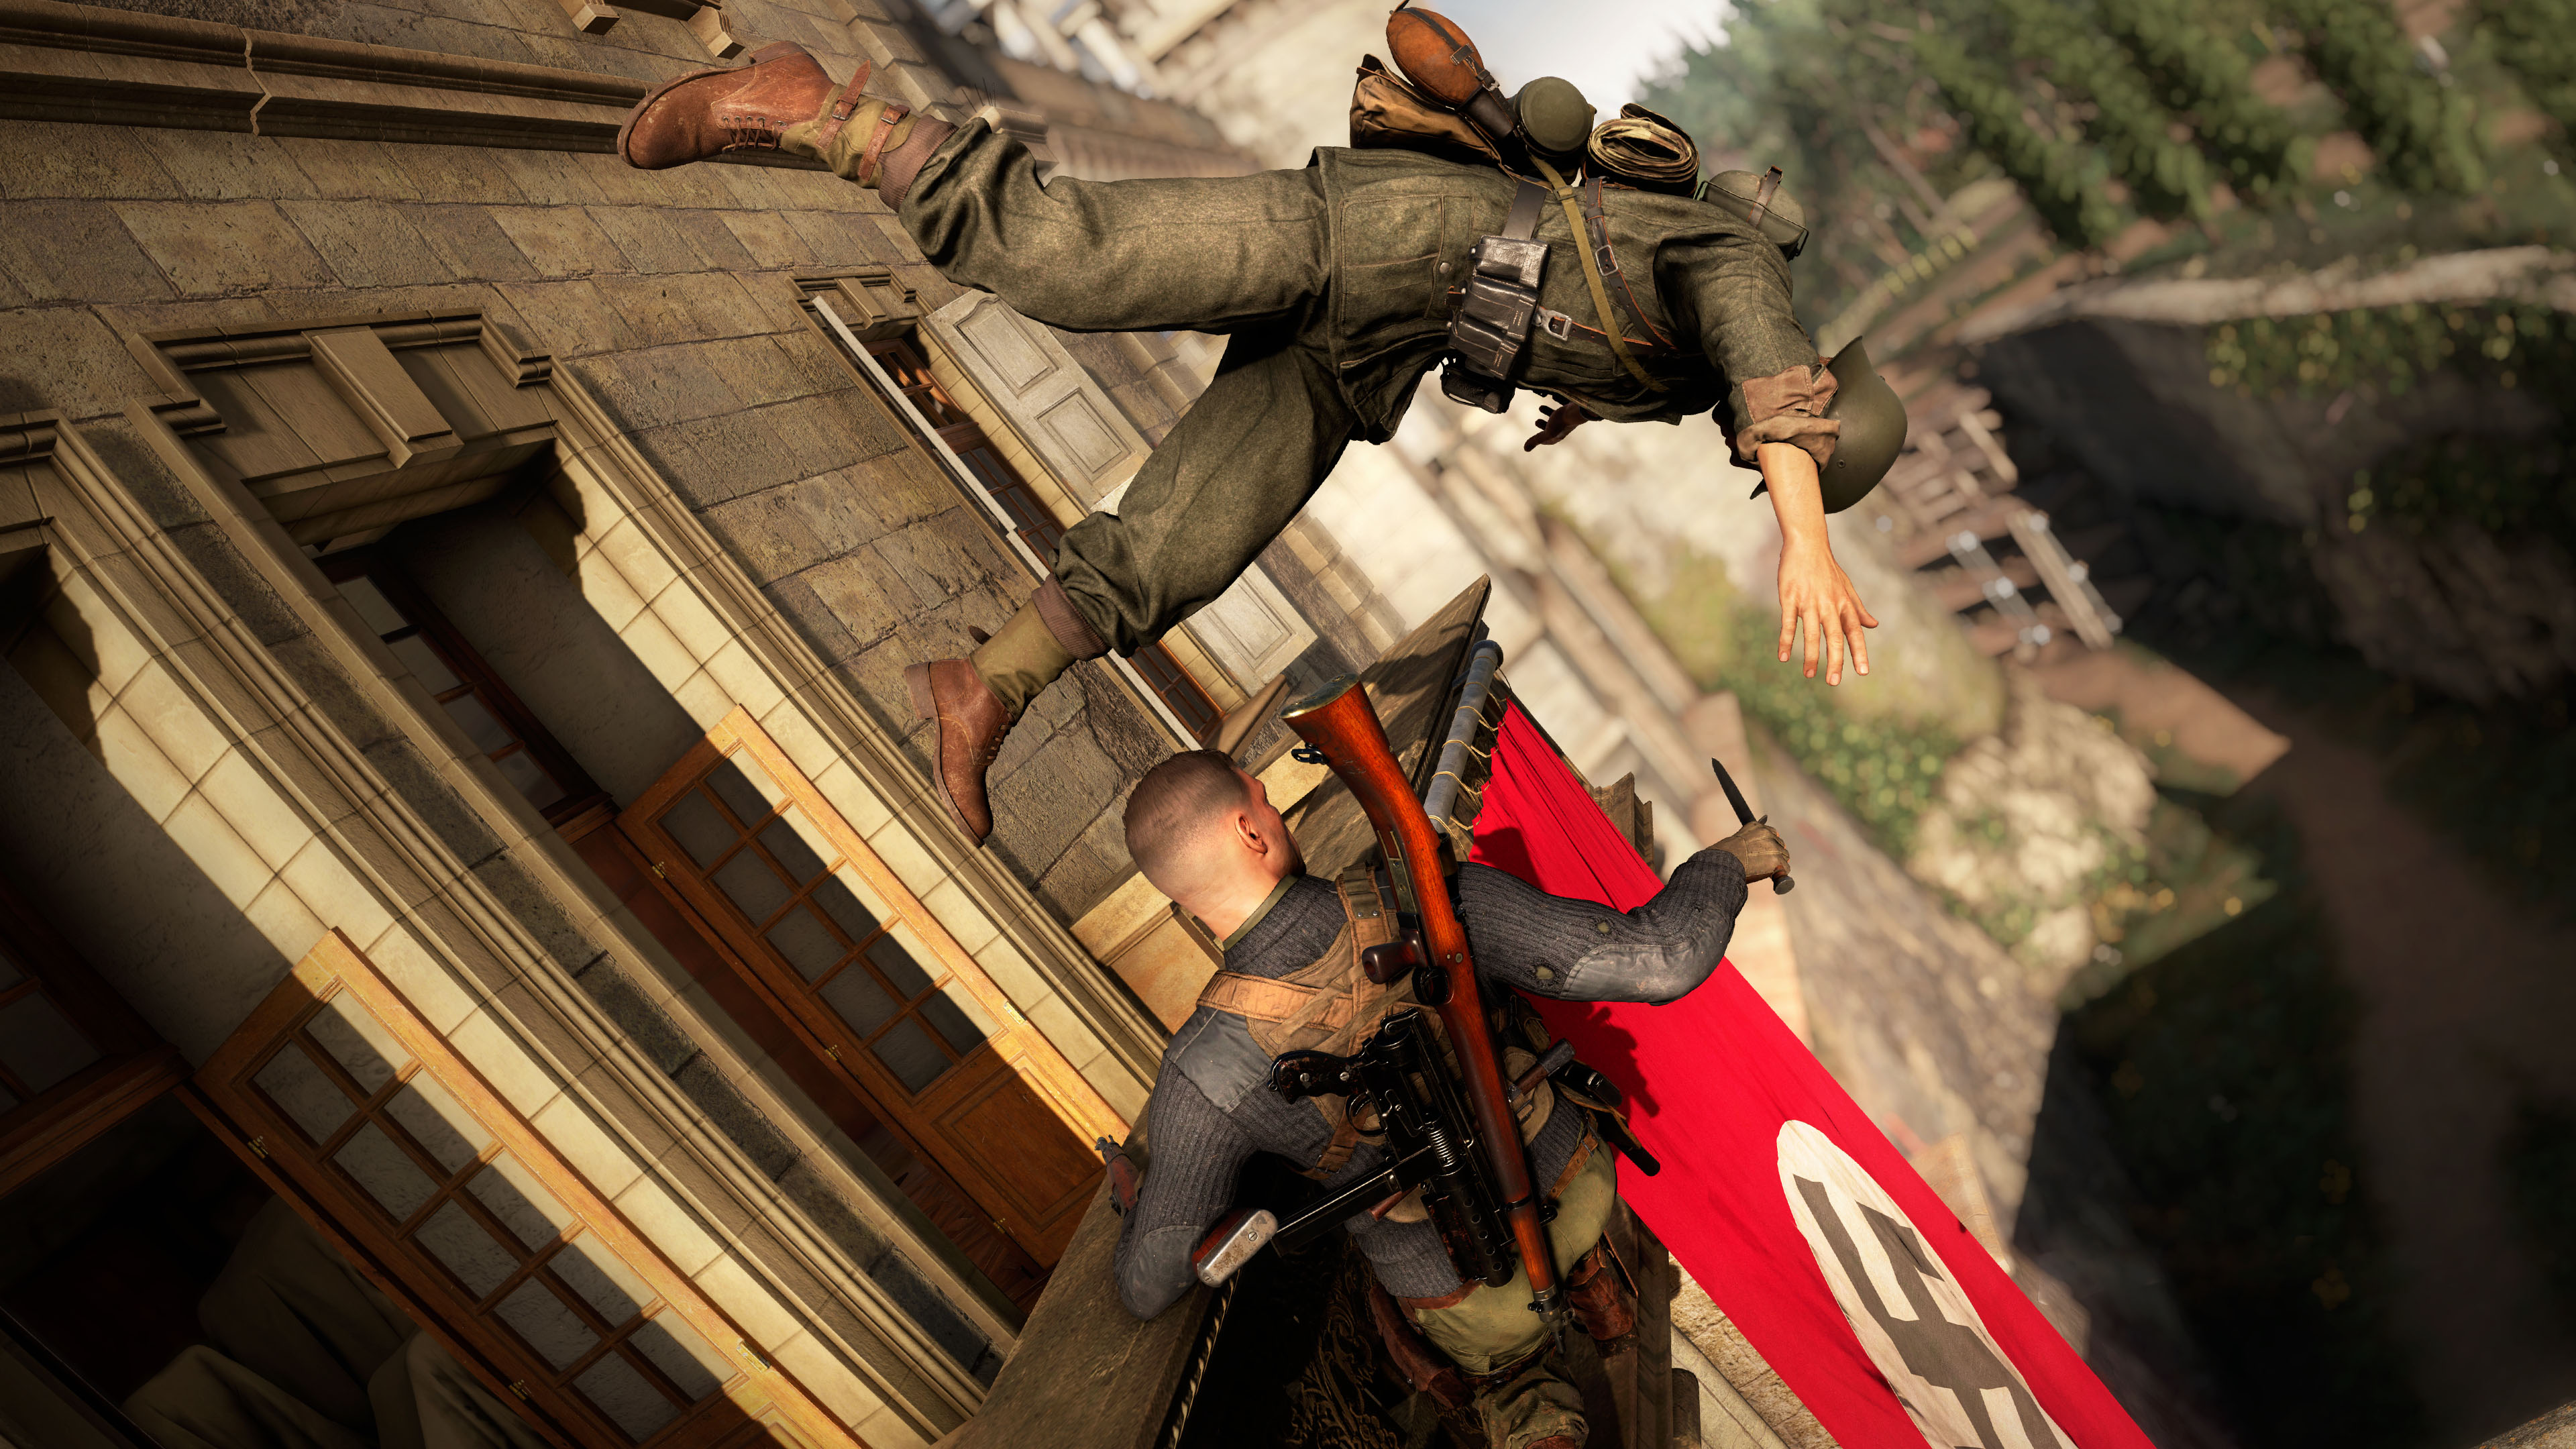 A Nazi gets thrown out of a window in Sniper Elite 5.